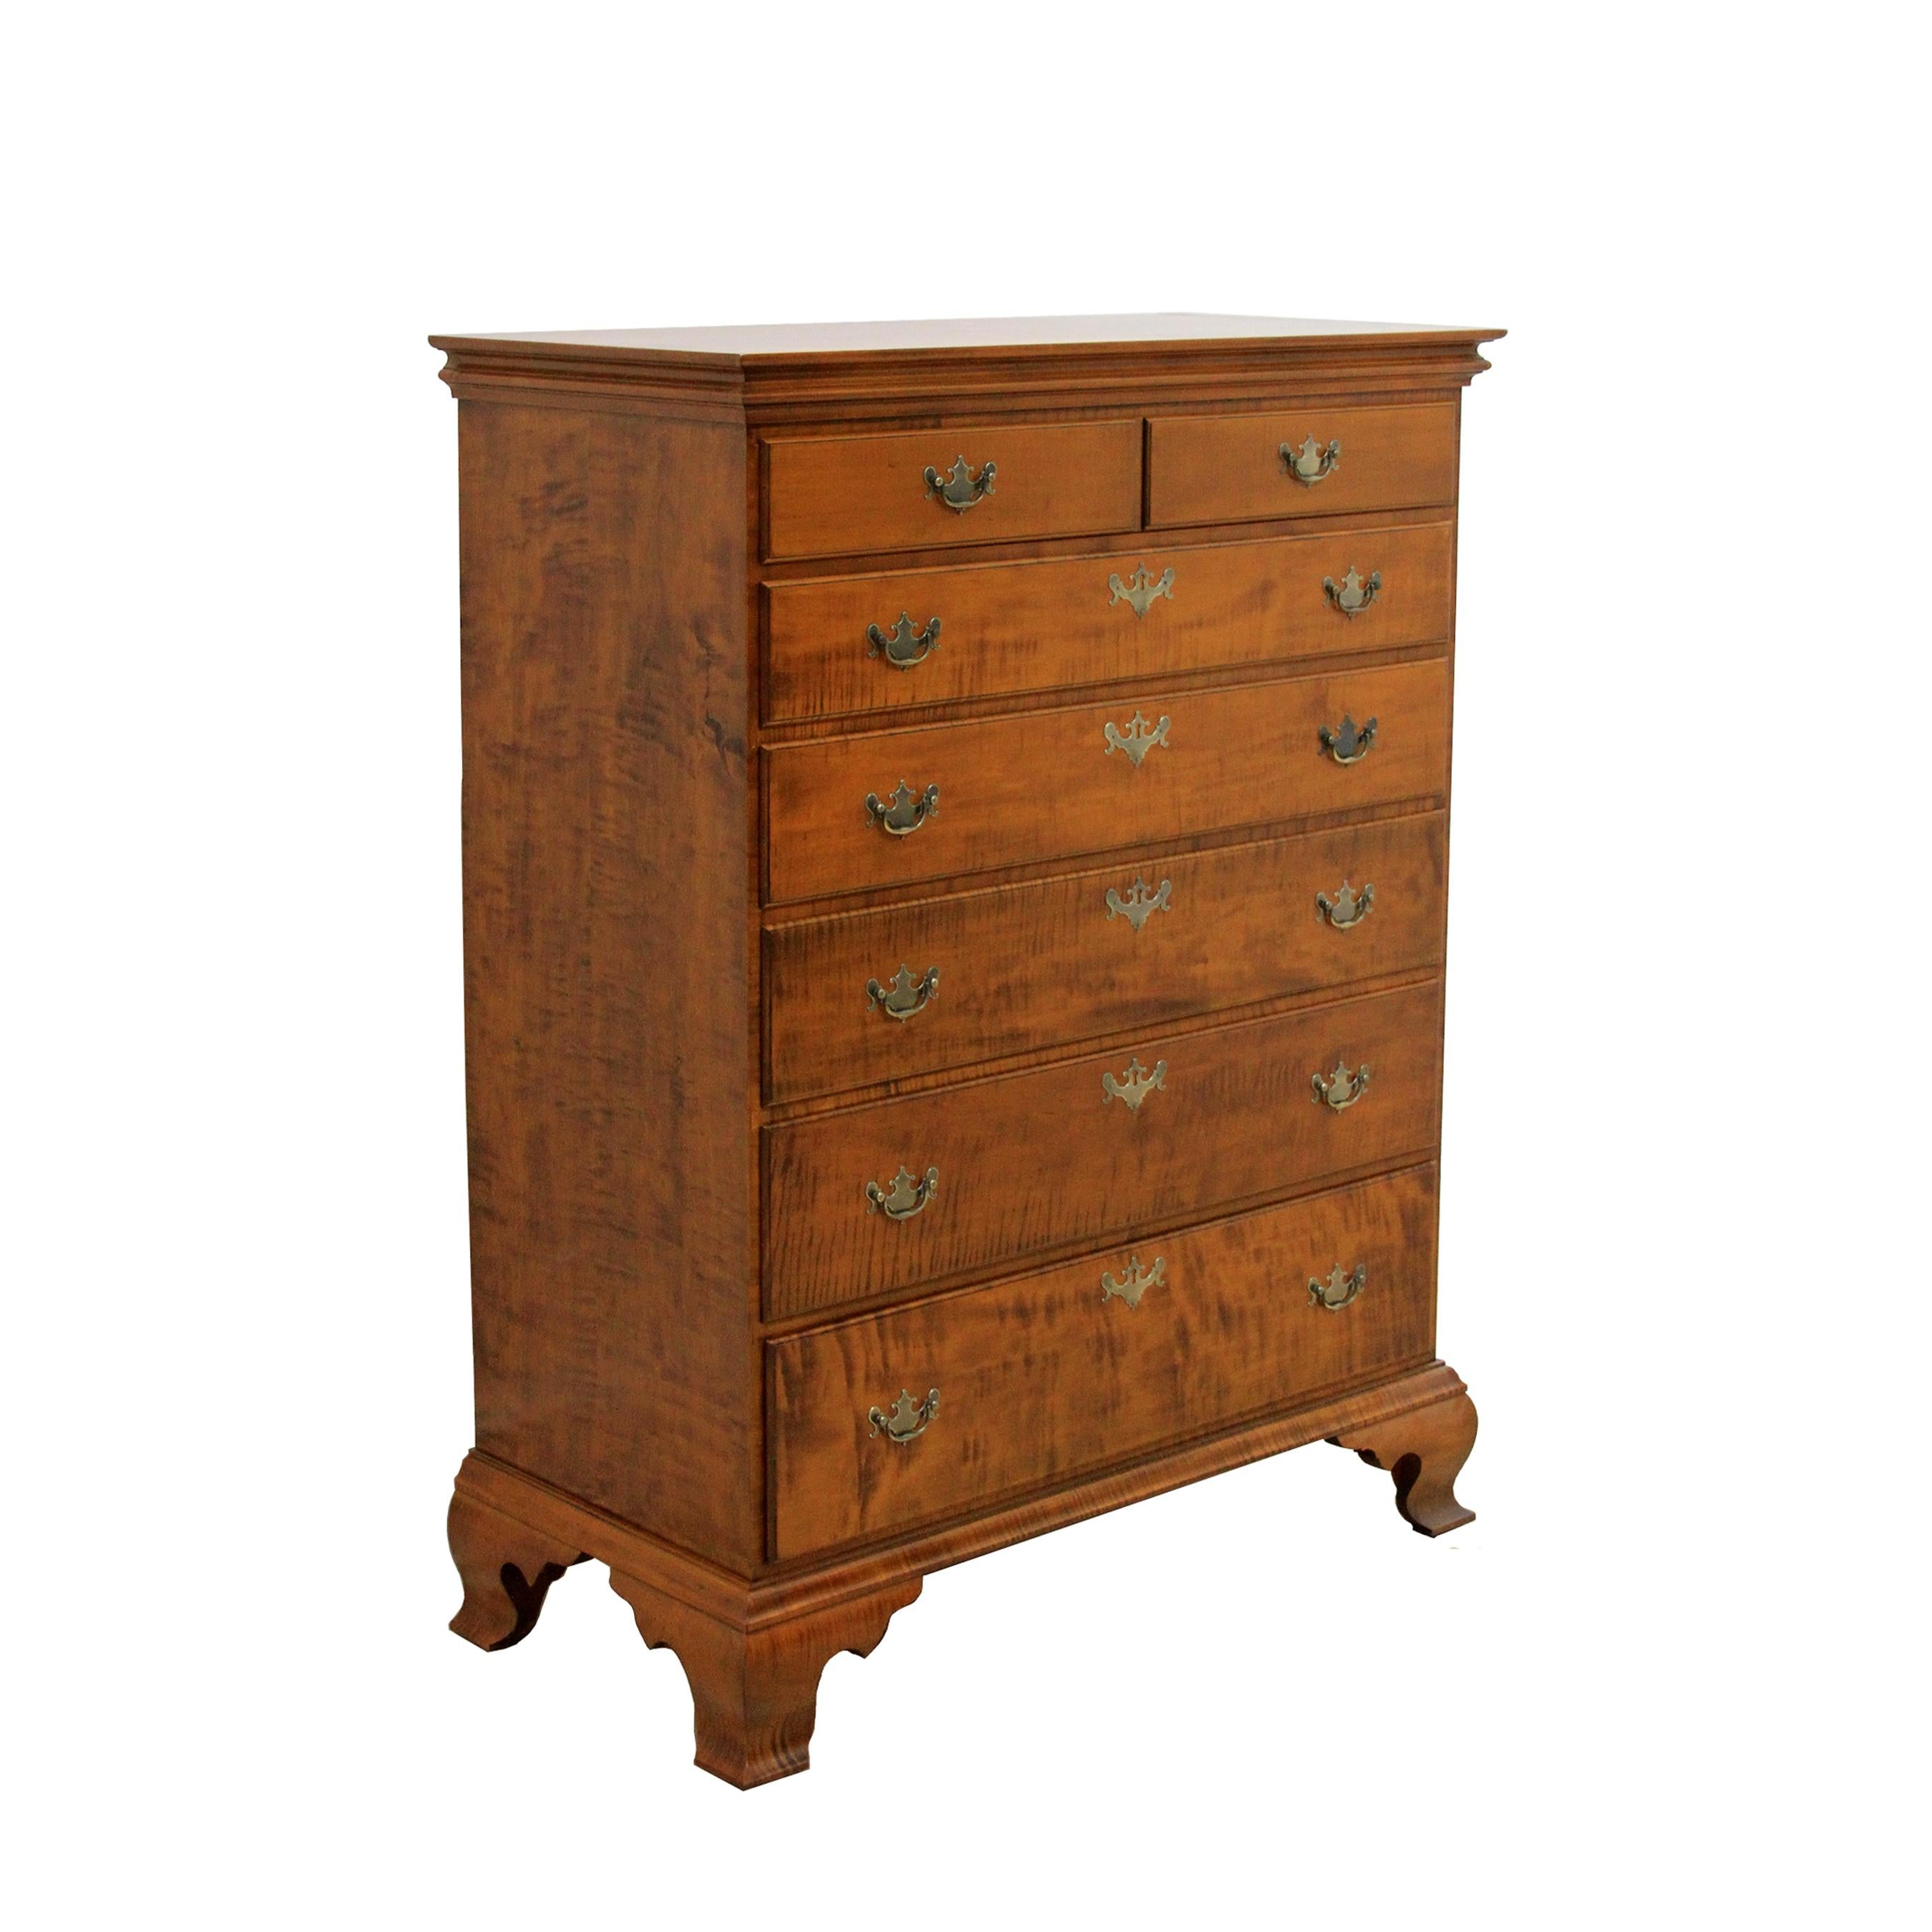 Our Chippendale tiger maple six drawer dresser is shown in our traditional stain with dovetailed drawer cases and top, OG bracket feet and Chippendale brass pulls available polished or antiqued with matching escutcheons. Custom sizes, wood types and